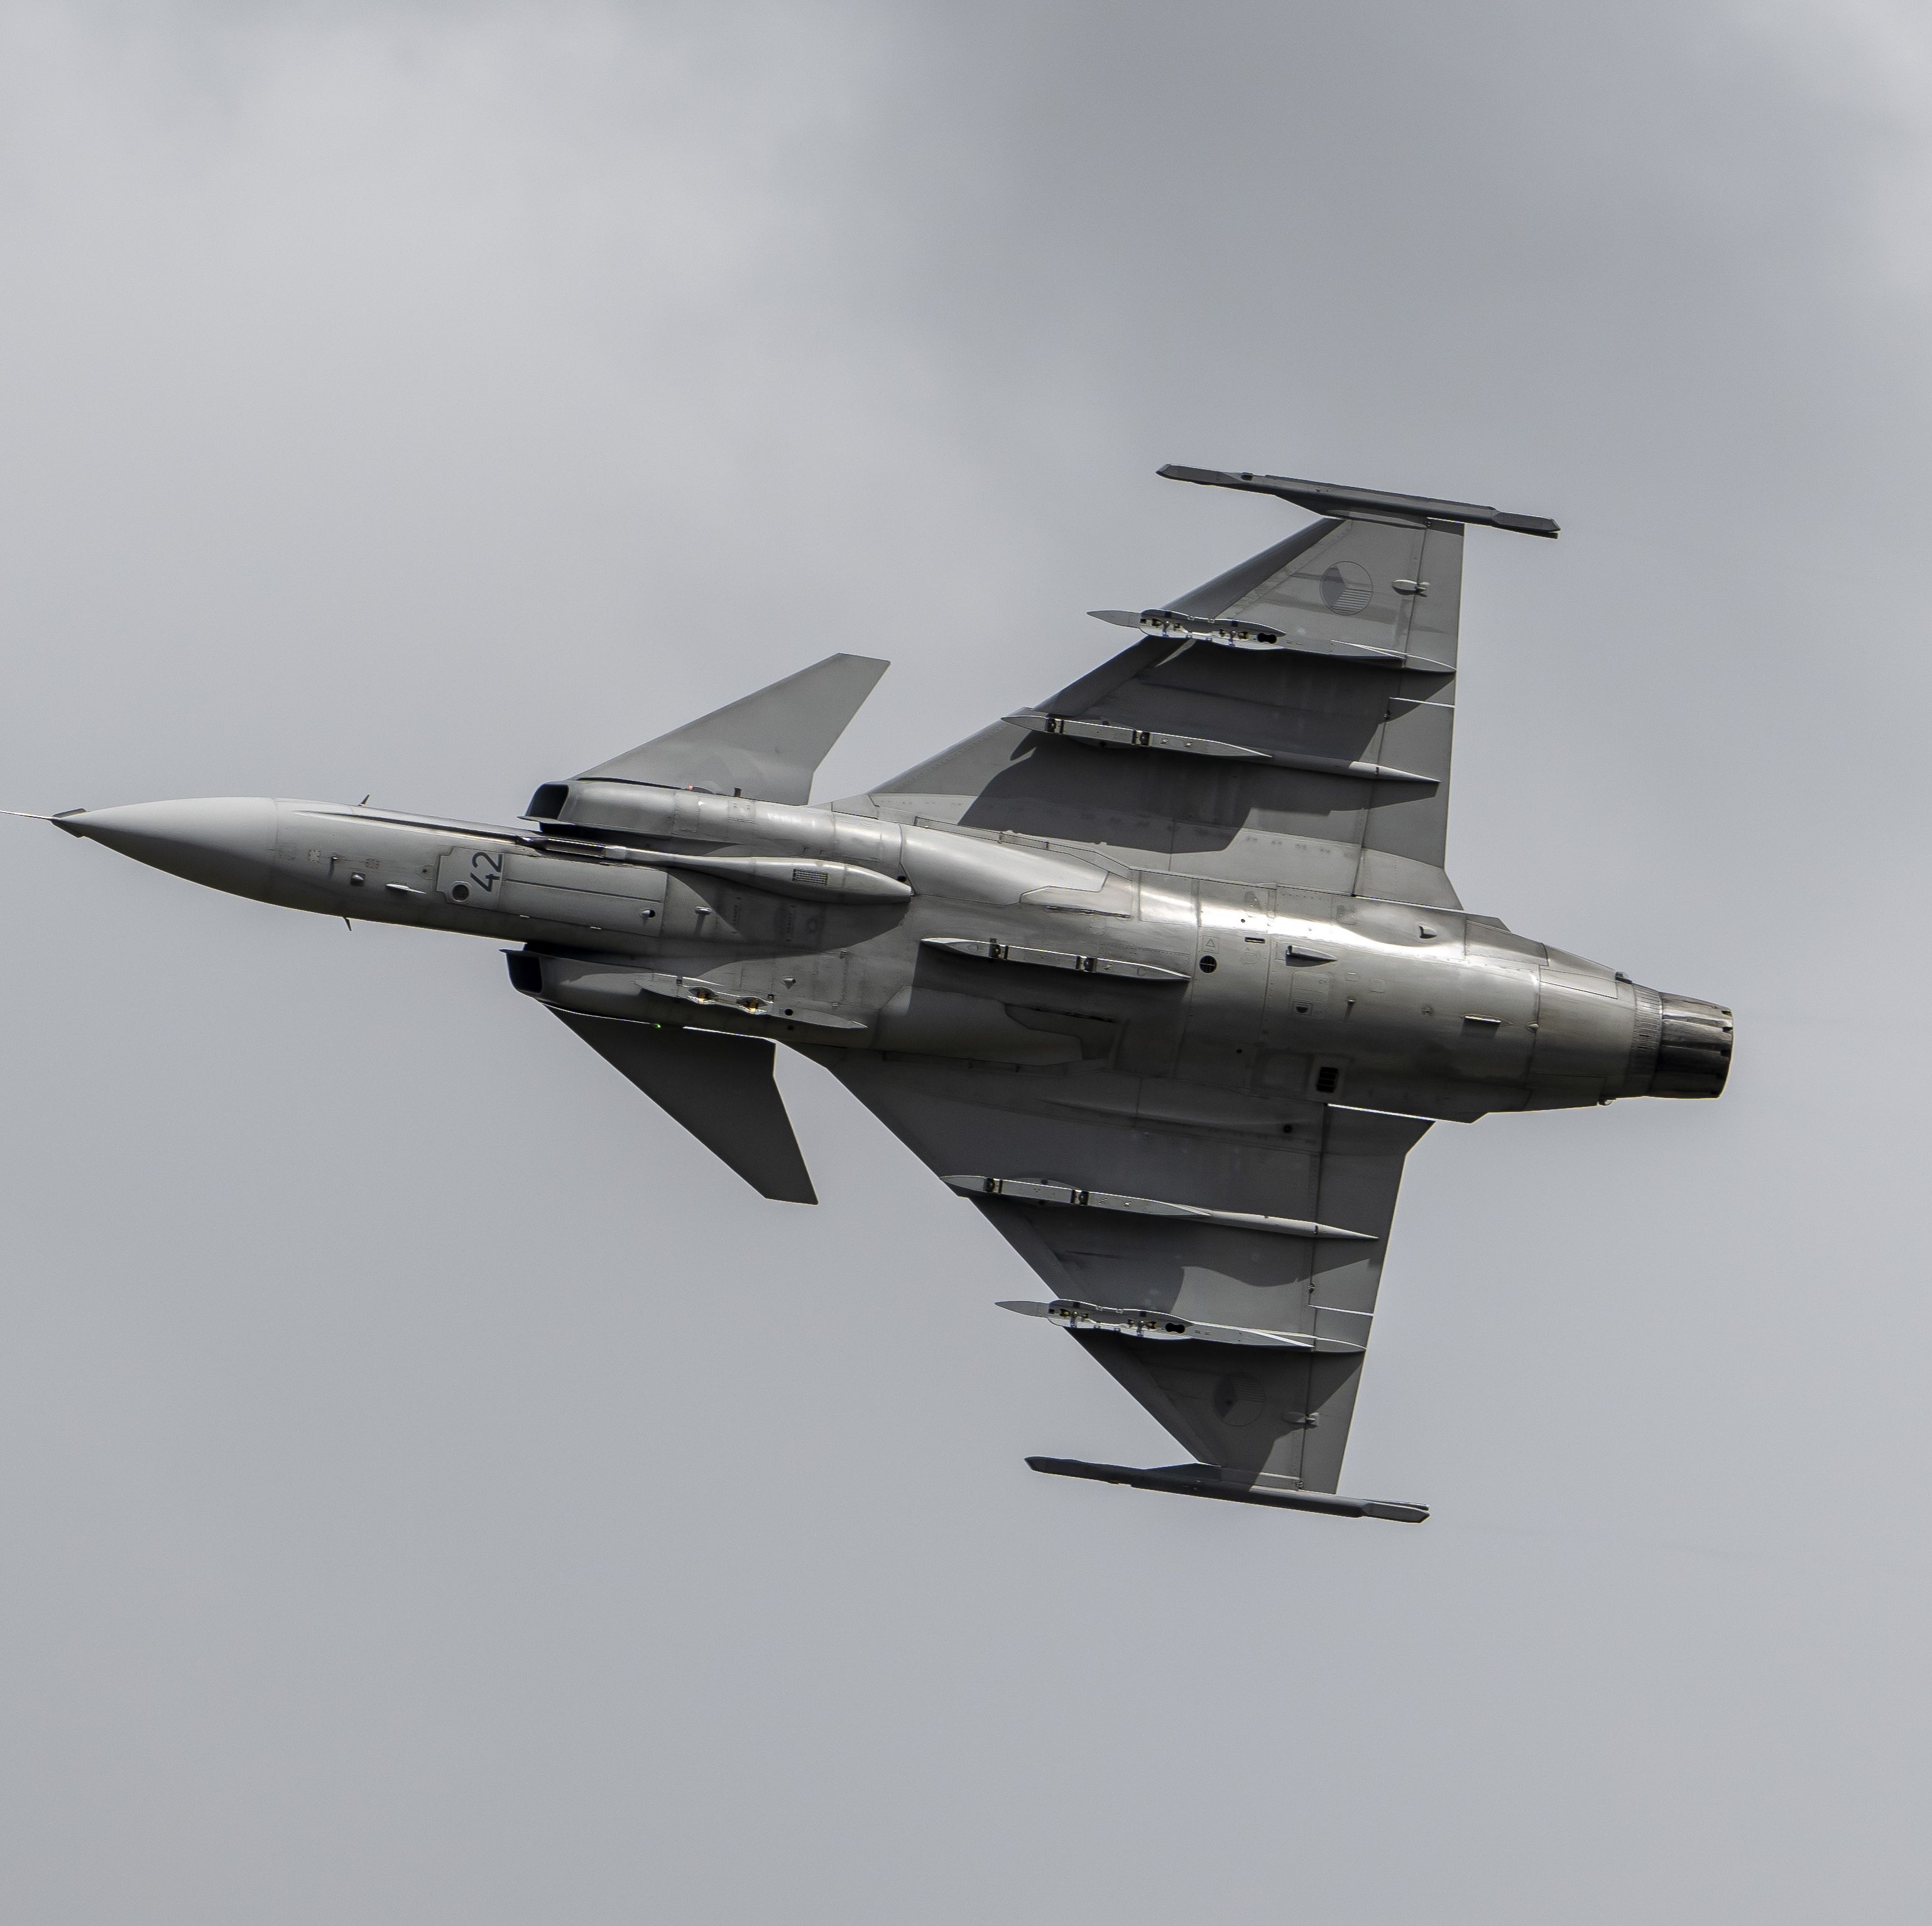 The Gripen Is the Dark Horse Jet That Could Help Rebuild Ukraine's Air Force